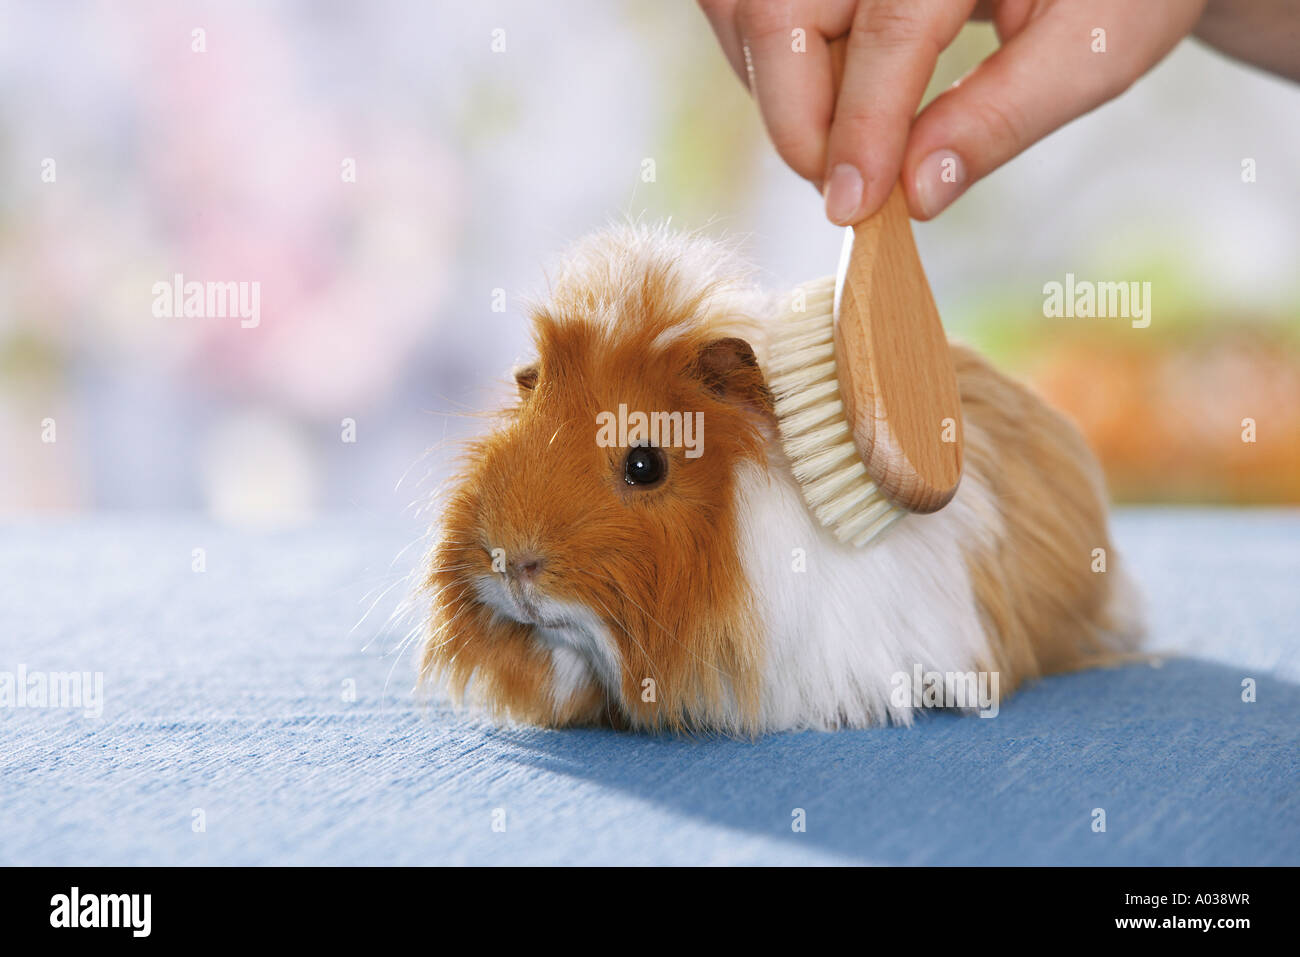 Guinea Pig Brush High Resolution Stock Photography and Images - Alamy